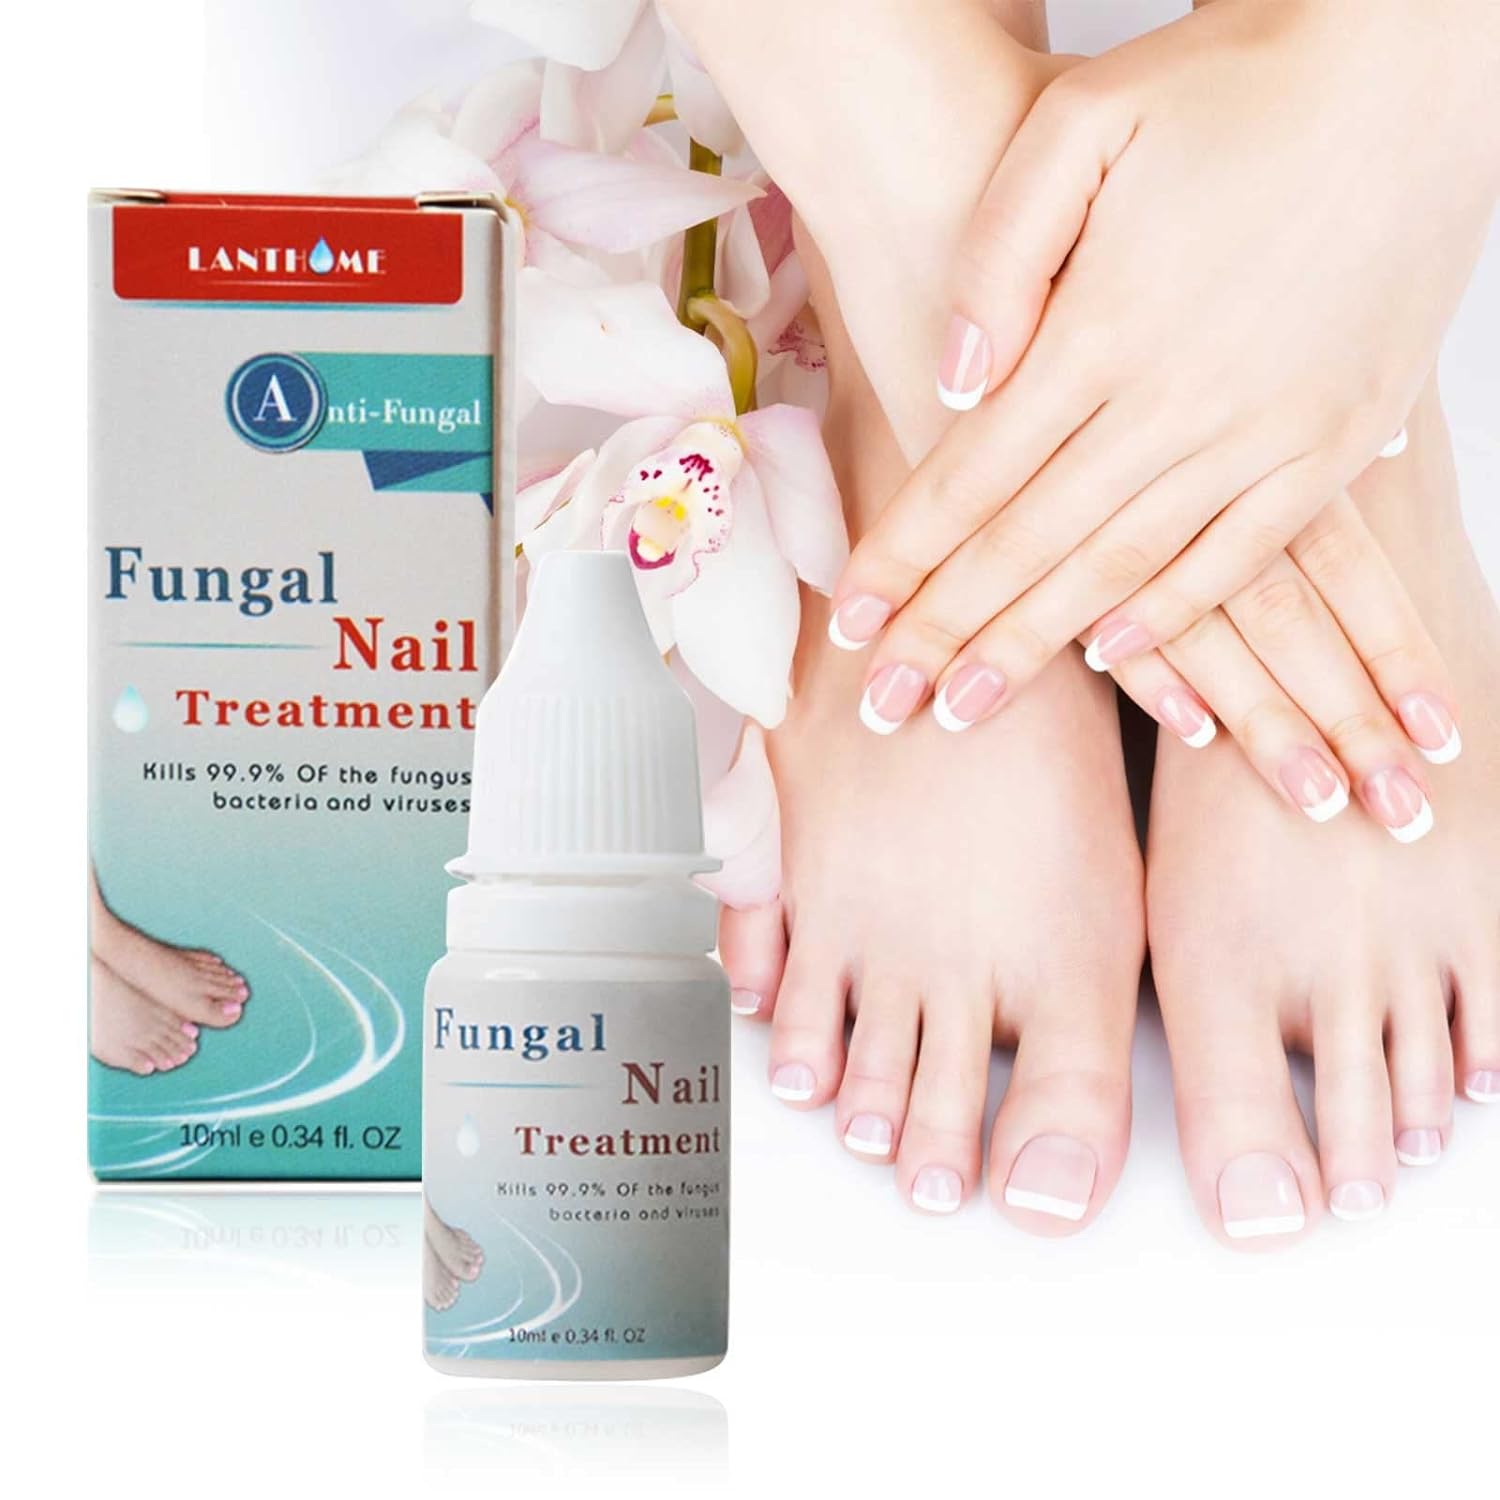 Get rid of nail fungus and be proud of your feet again » Franklin, TN |  University Foot & Ankle Center